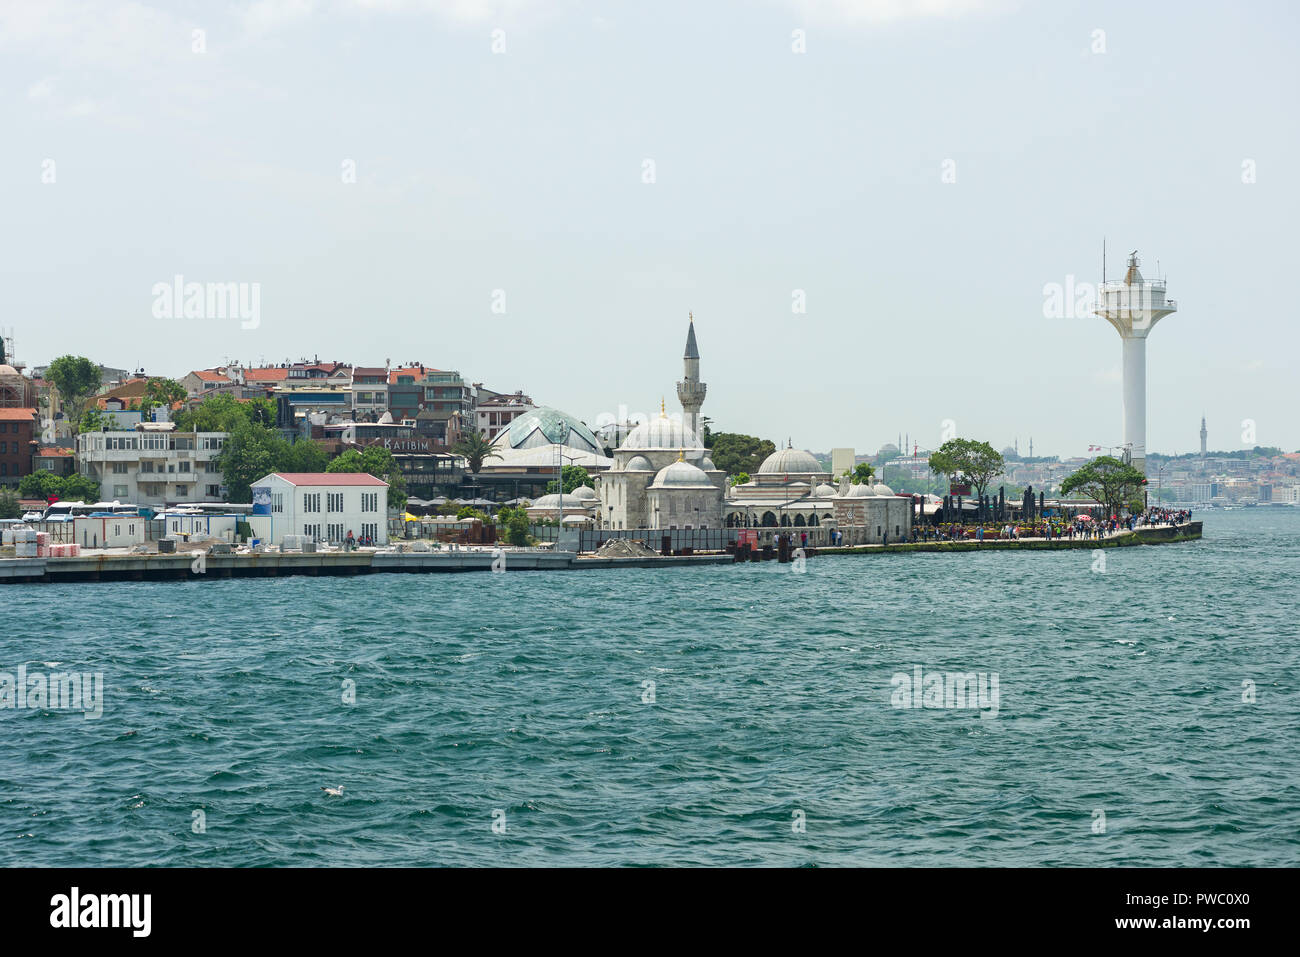 Buildings, mosque and Bosphorus Traffic Signalling Tower in the Üsküdar area of Istanbul from the Bosphorus Strait on a sunny day Stock Photo